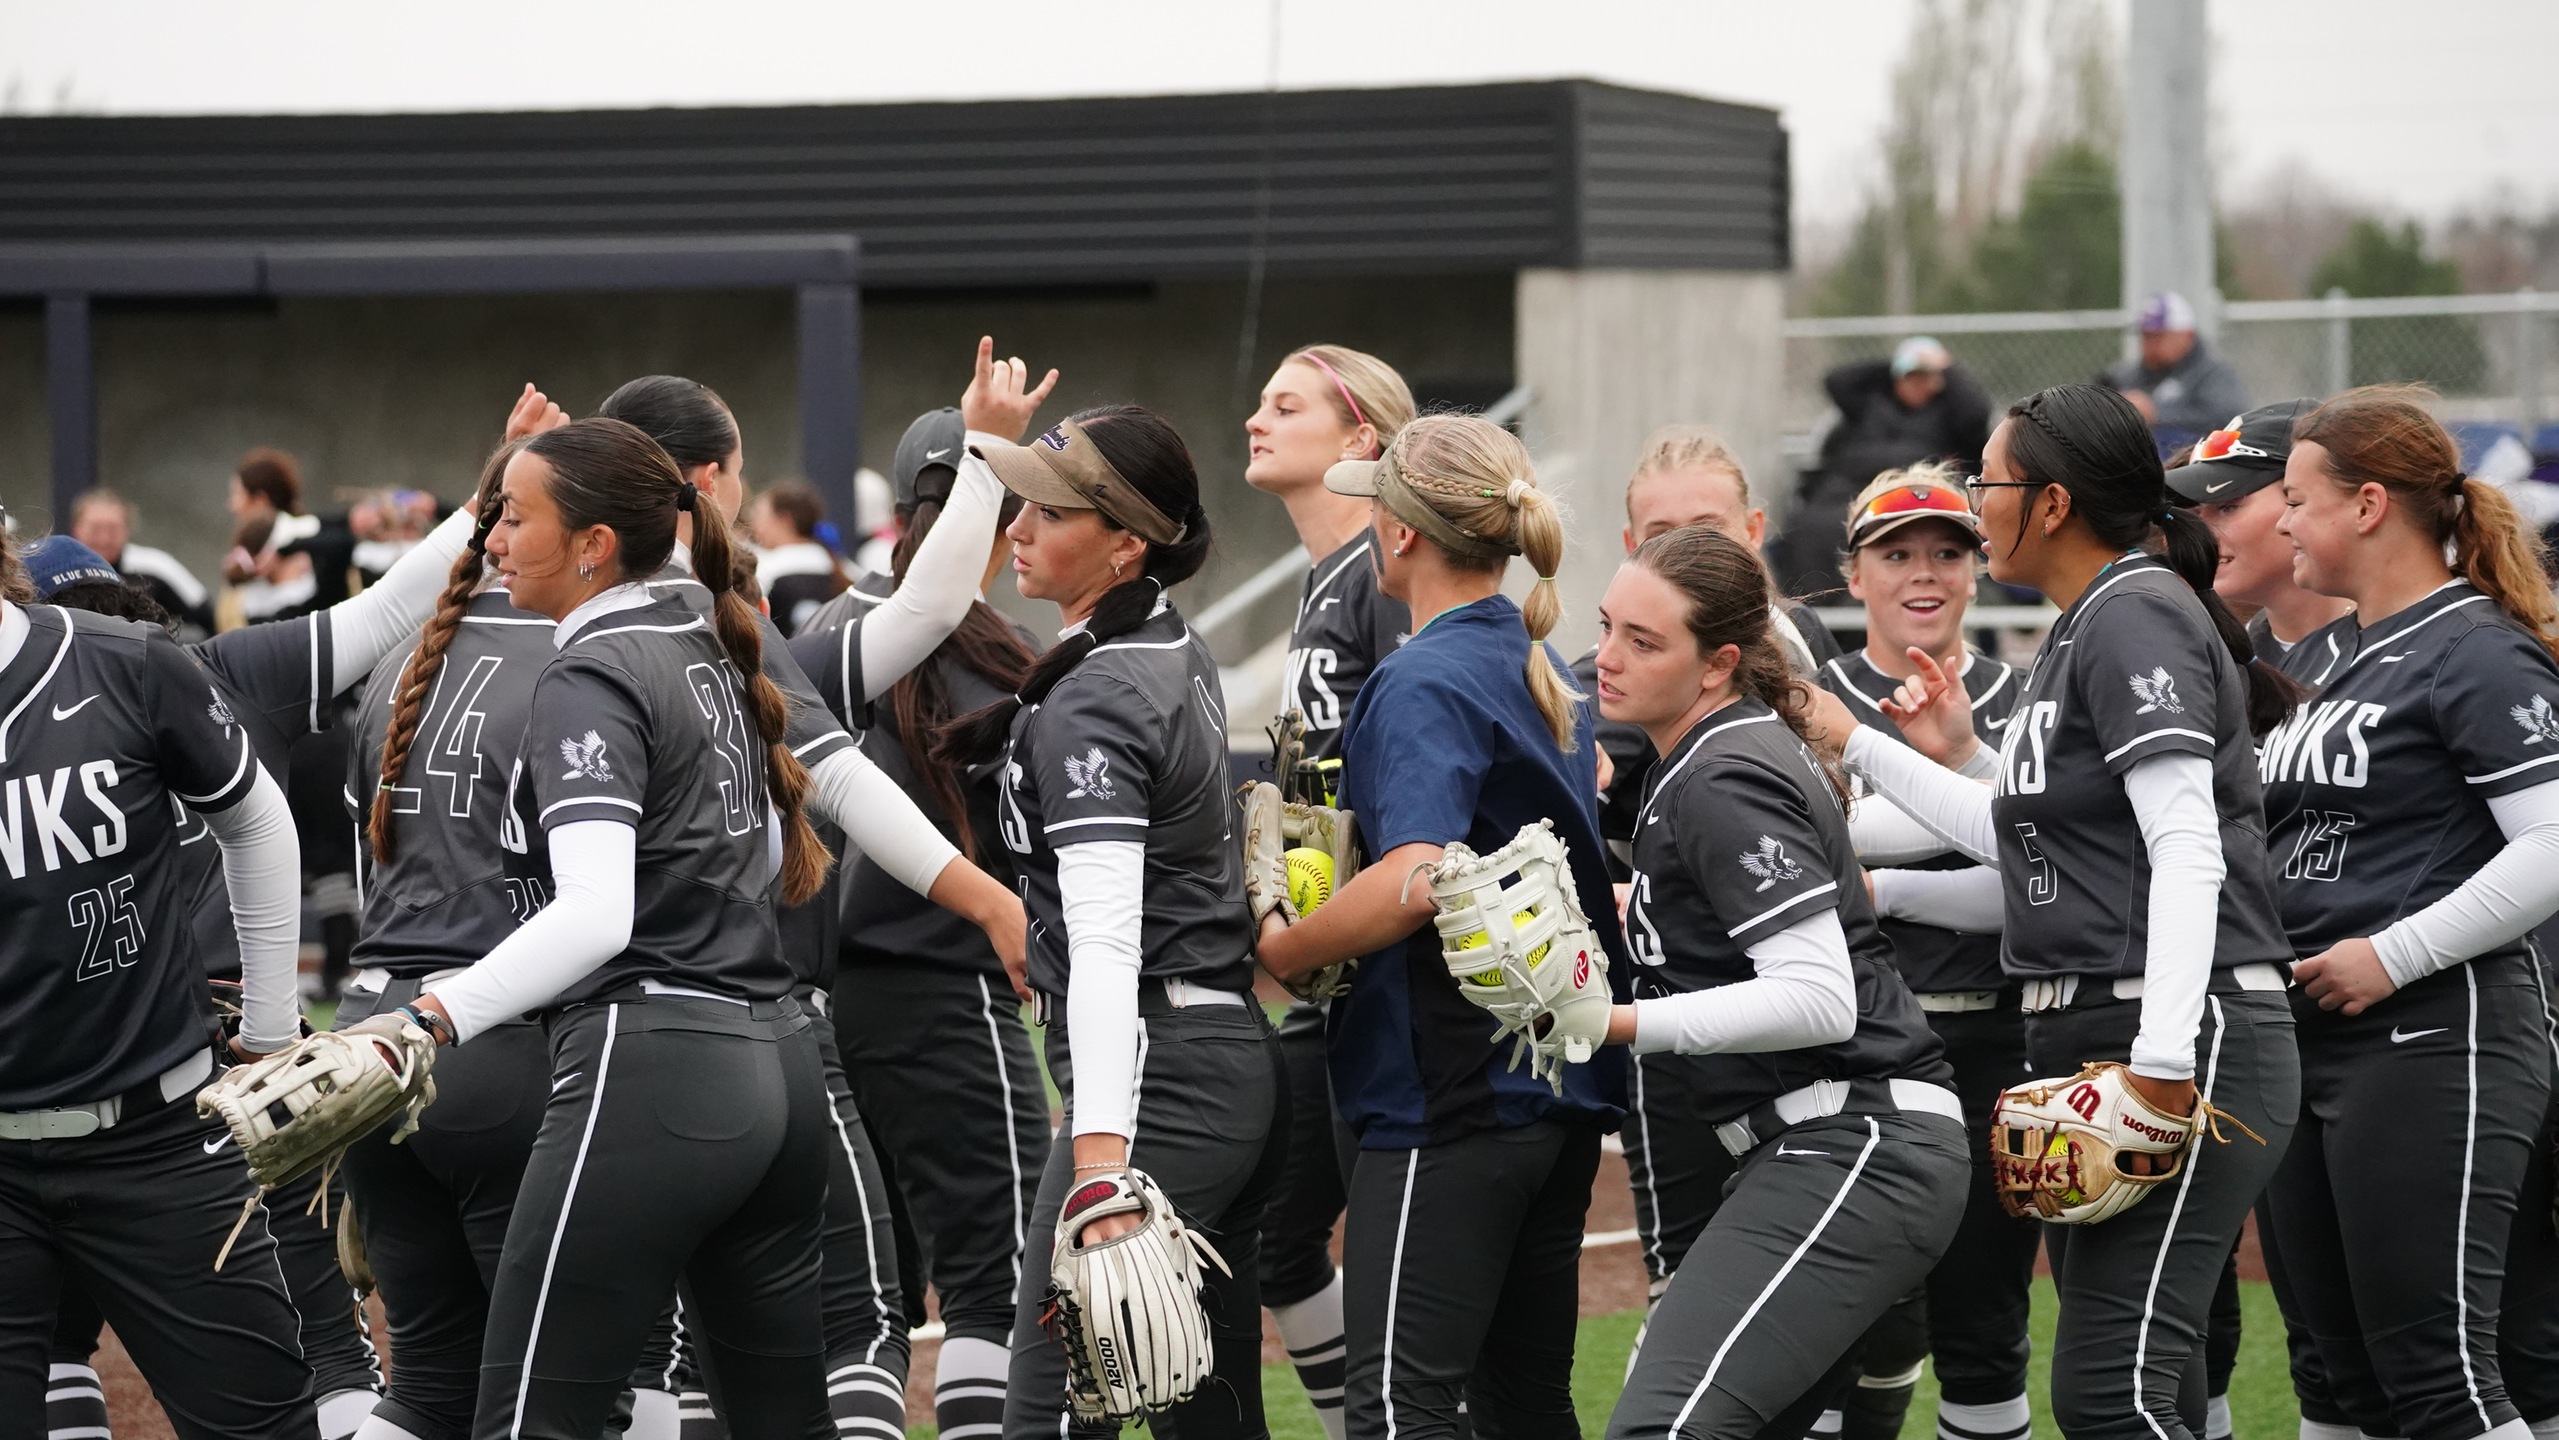 Blue Hawks set to head to Fayette Bracket for NAIA Opening Round